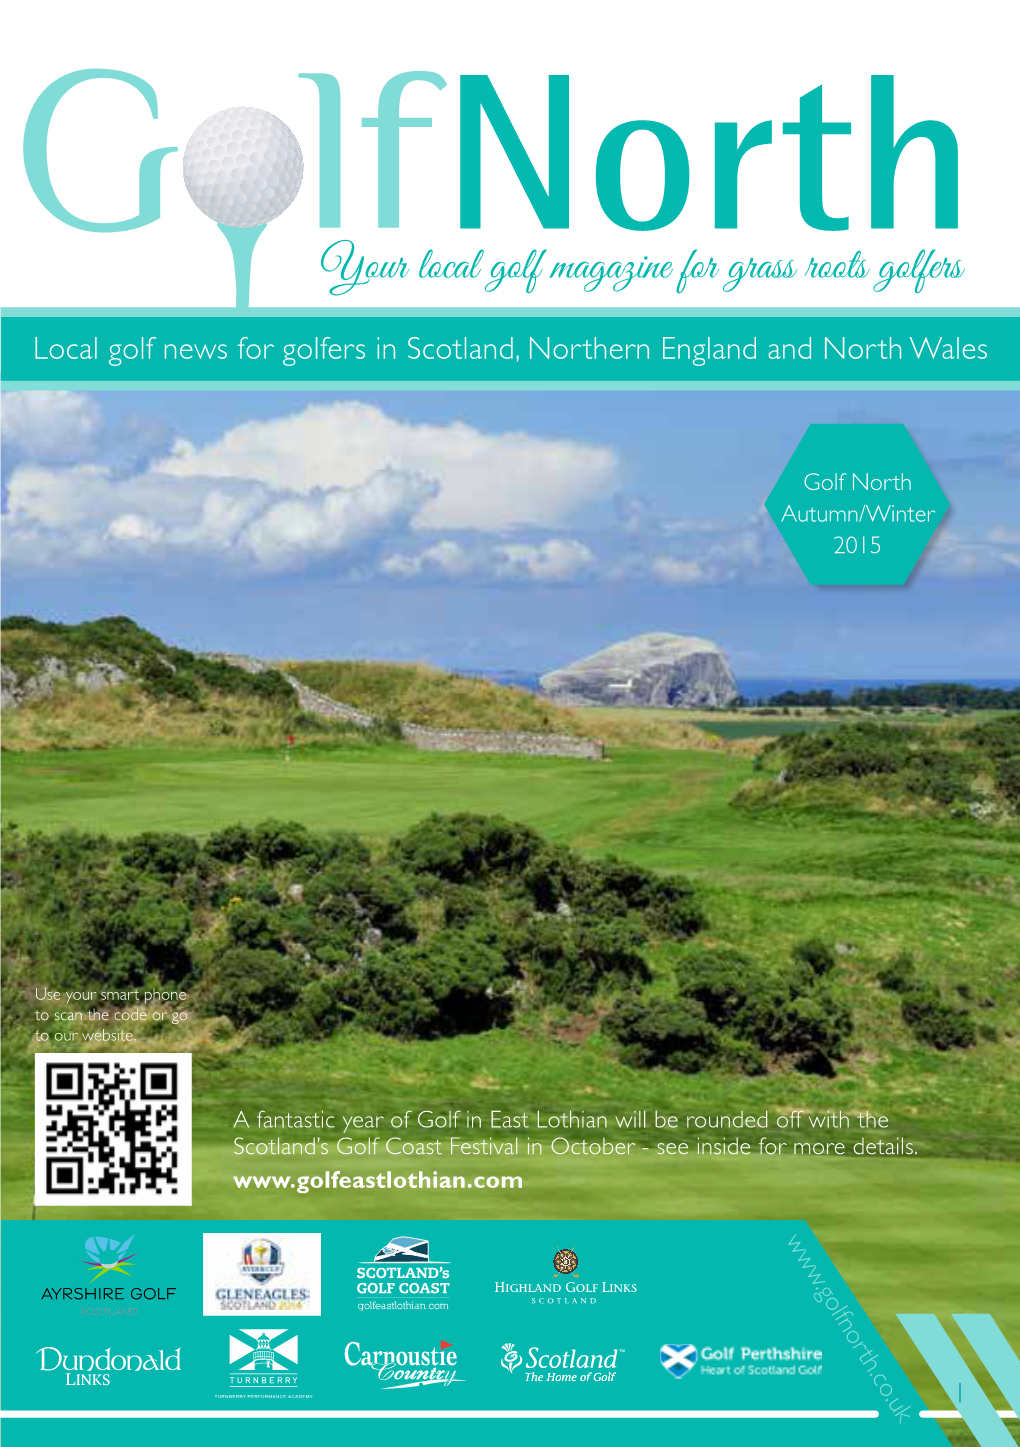 Your Local Golf Magazine for Grass Roots Golfers